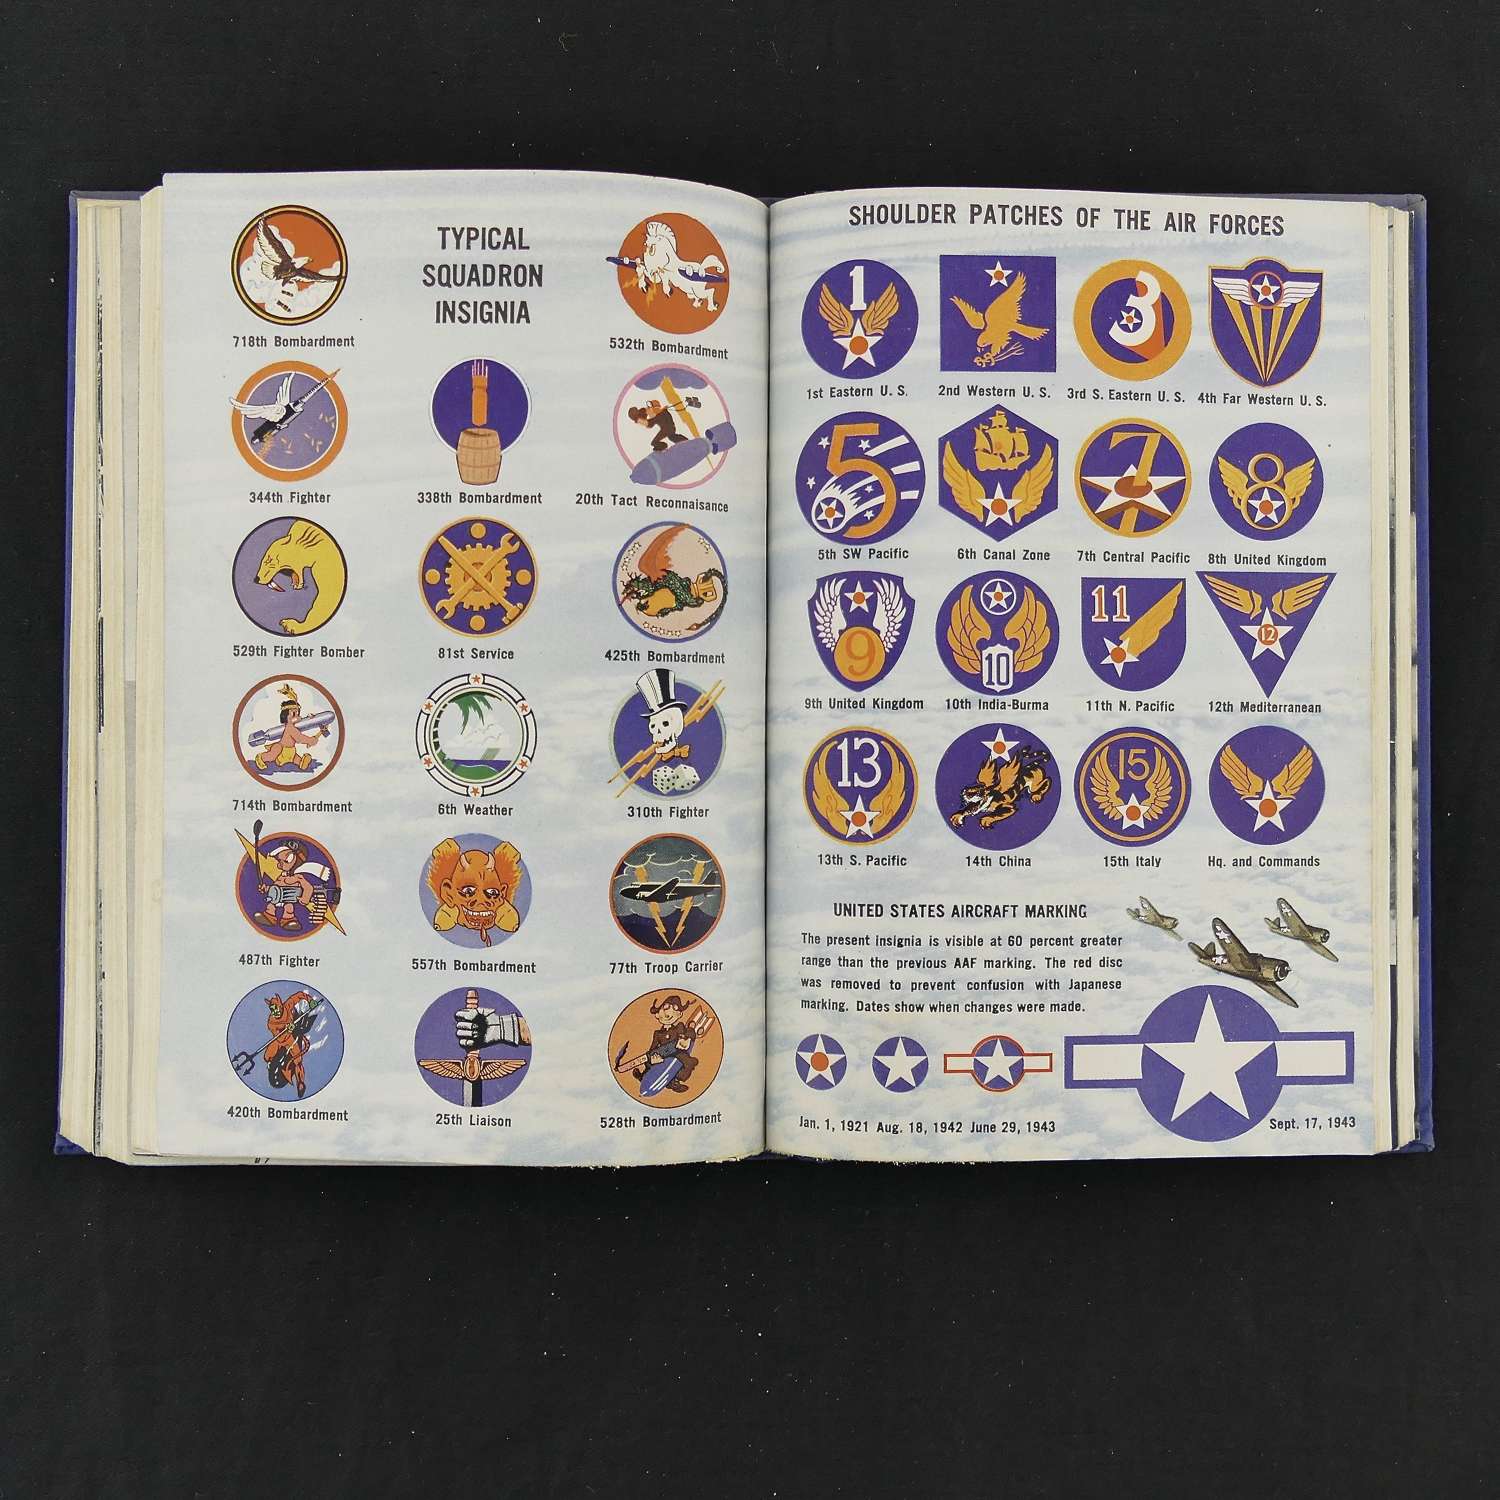 The Official Guide to the AAF, 1944, 1st edition